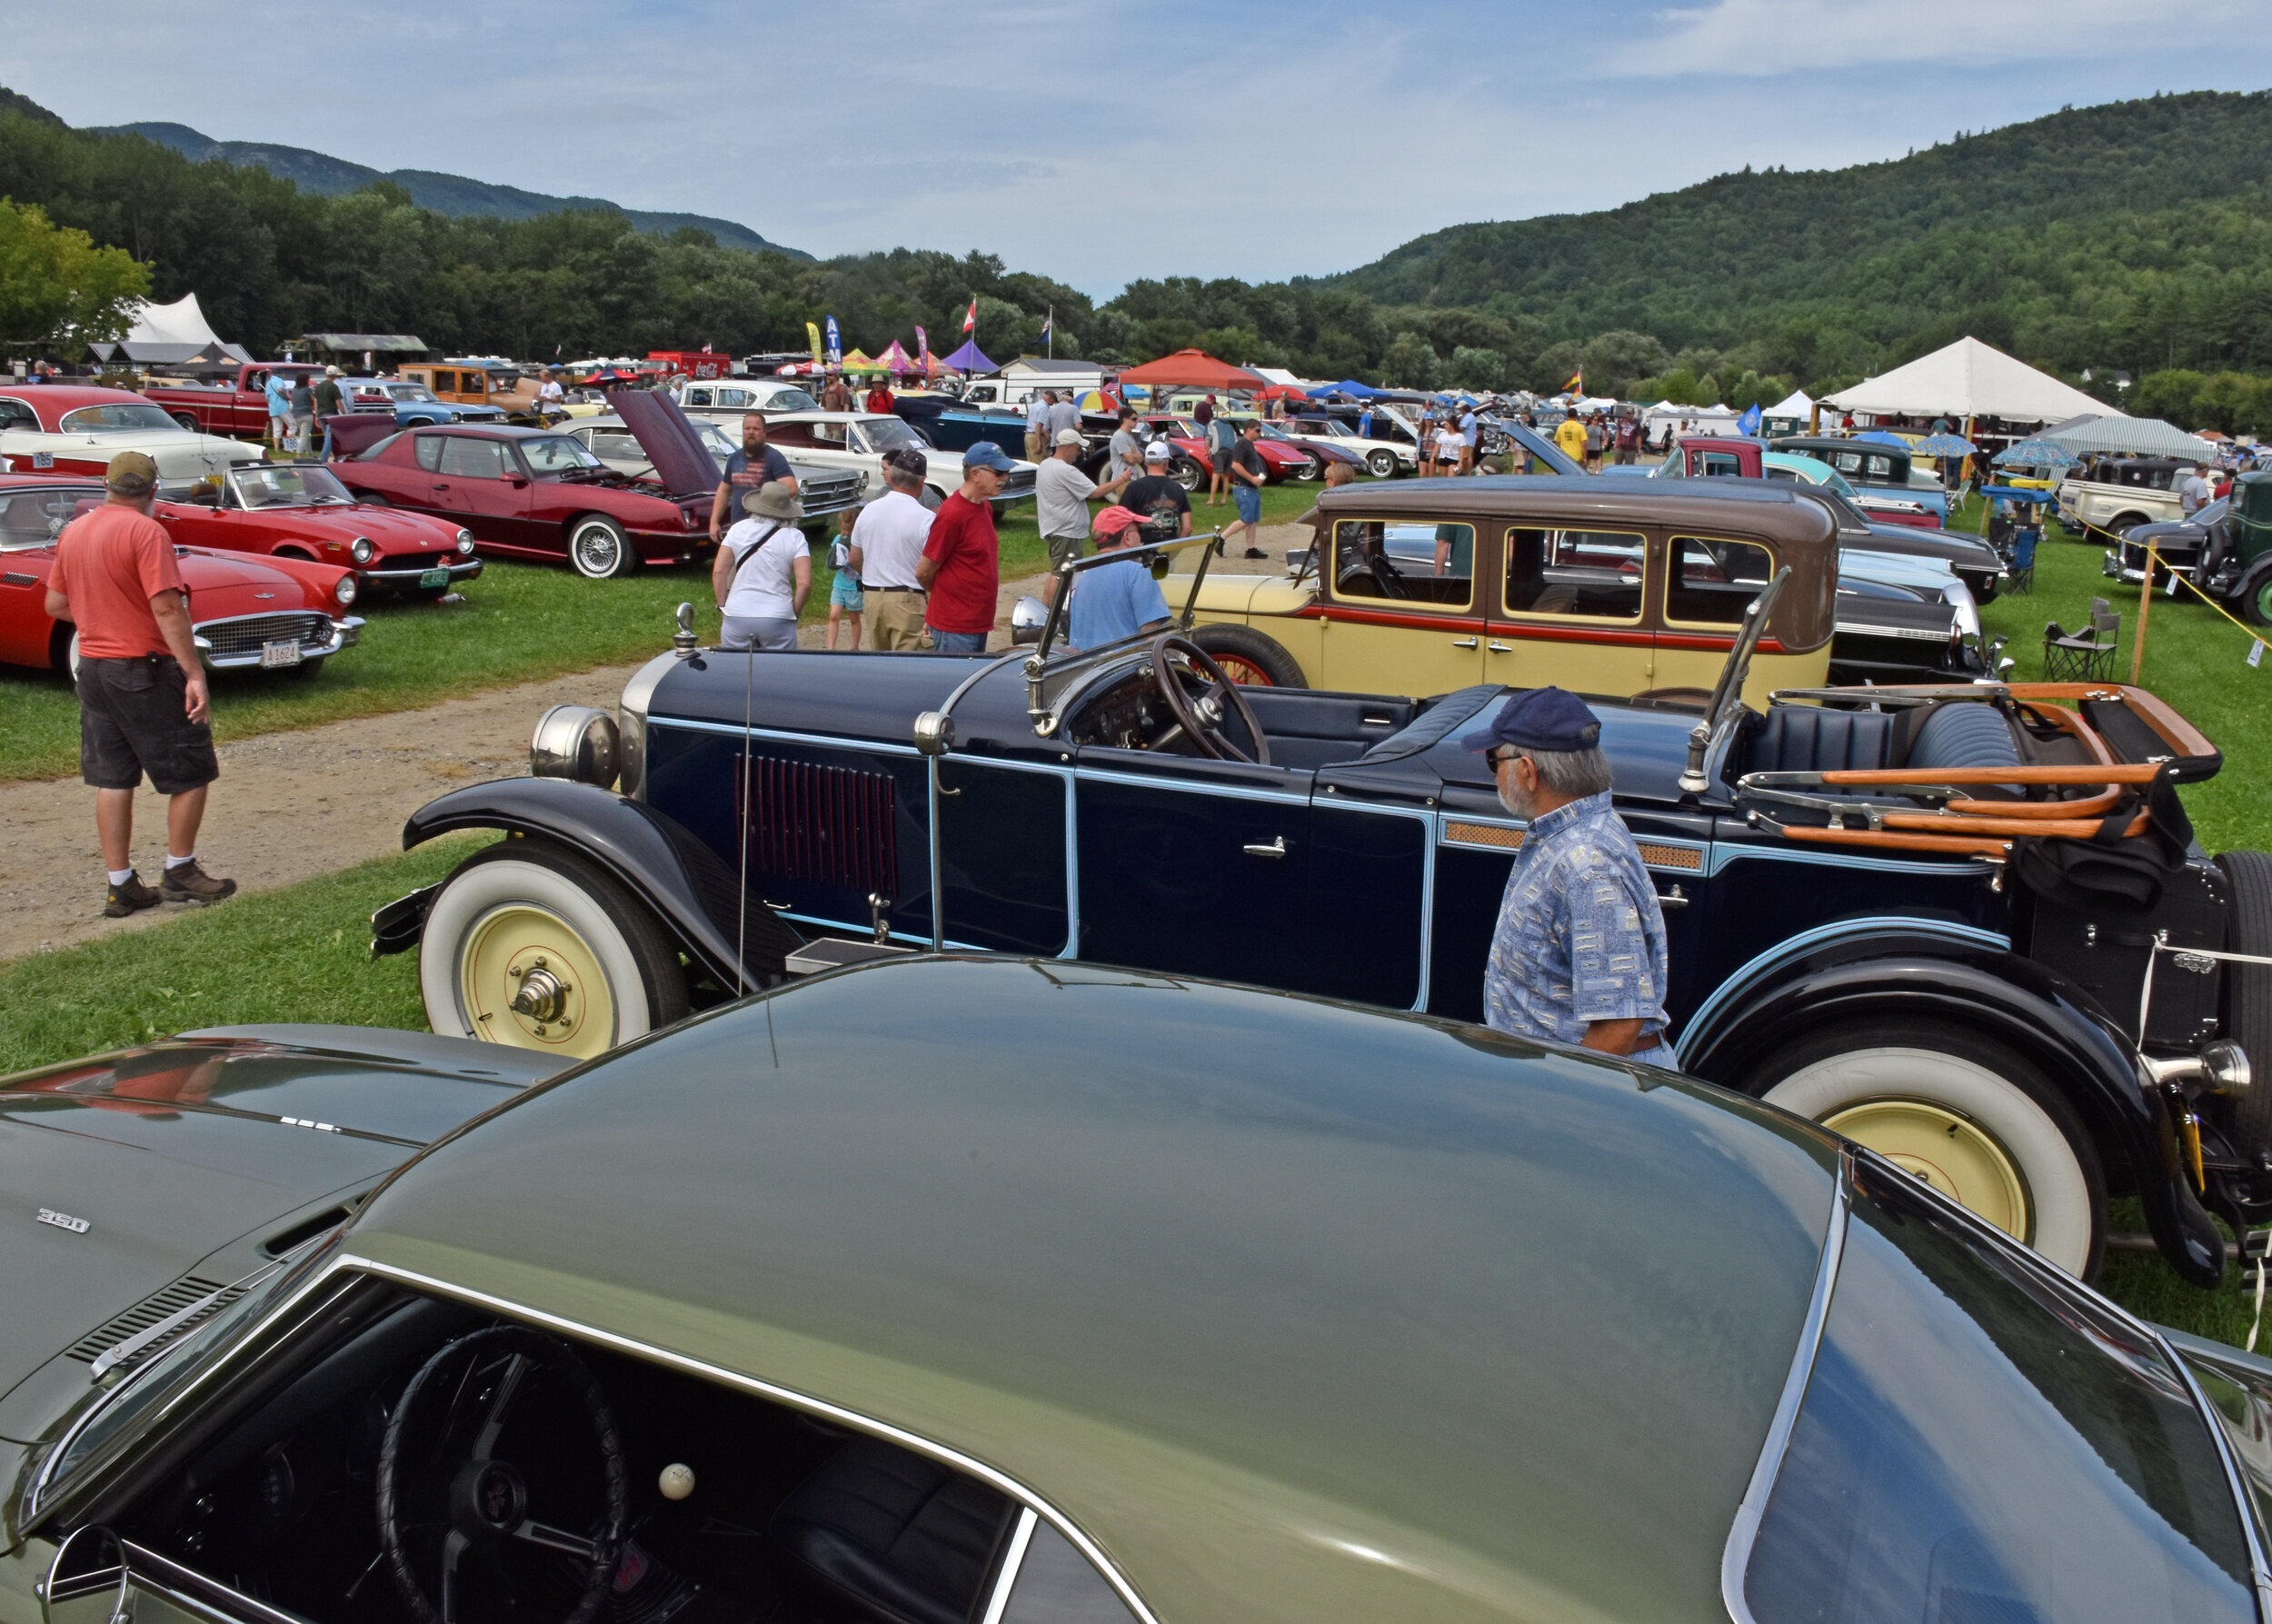 Limited Antique car show waterbury vt with Best Modified